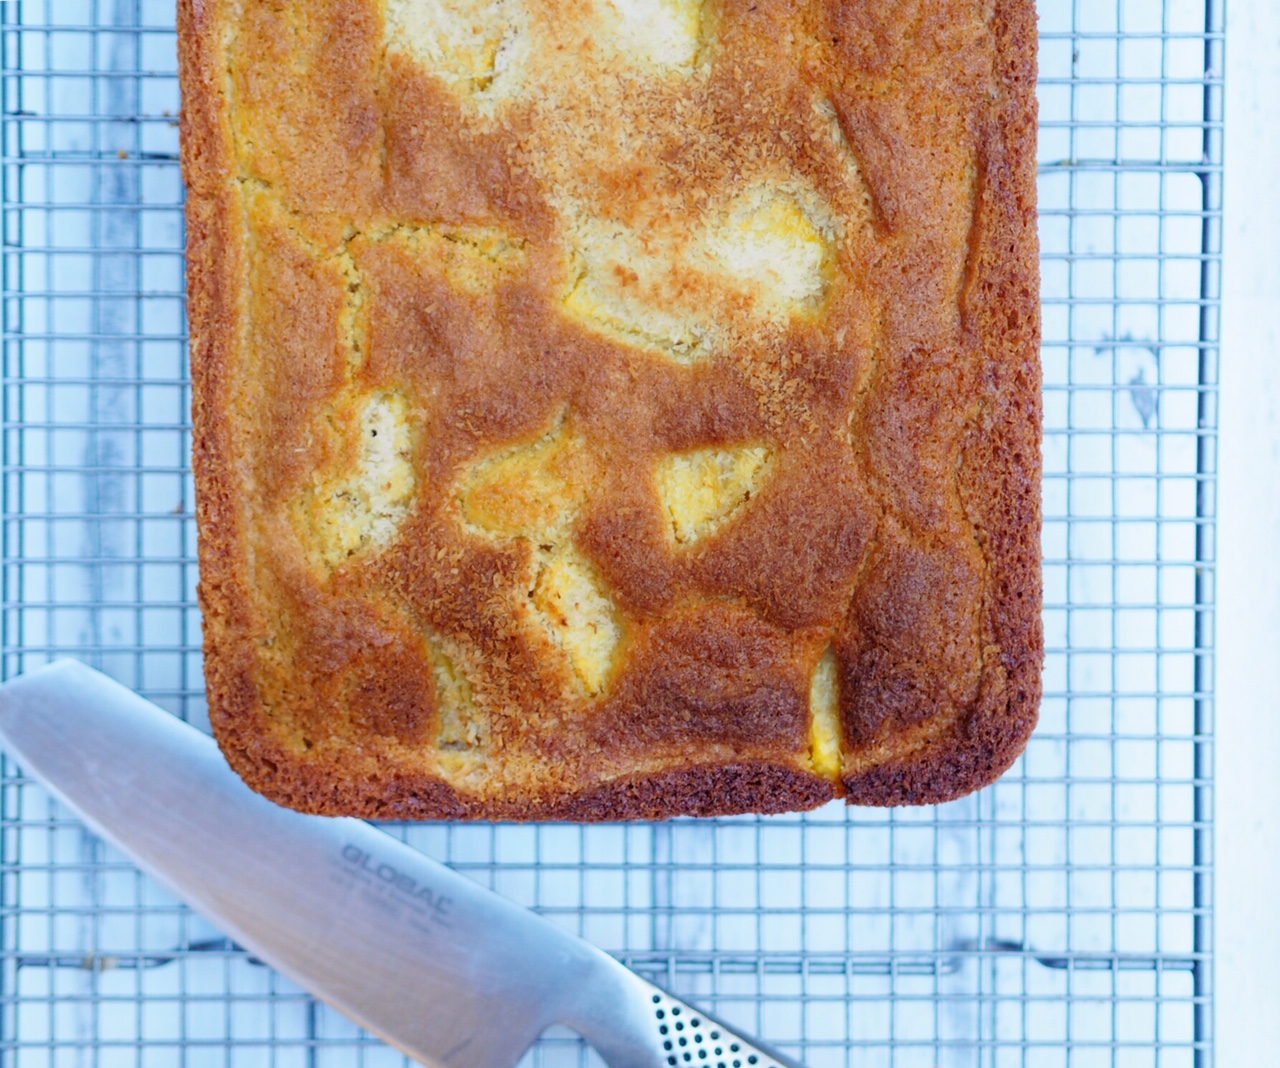 Pineapple and Coconut Slice Cake